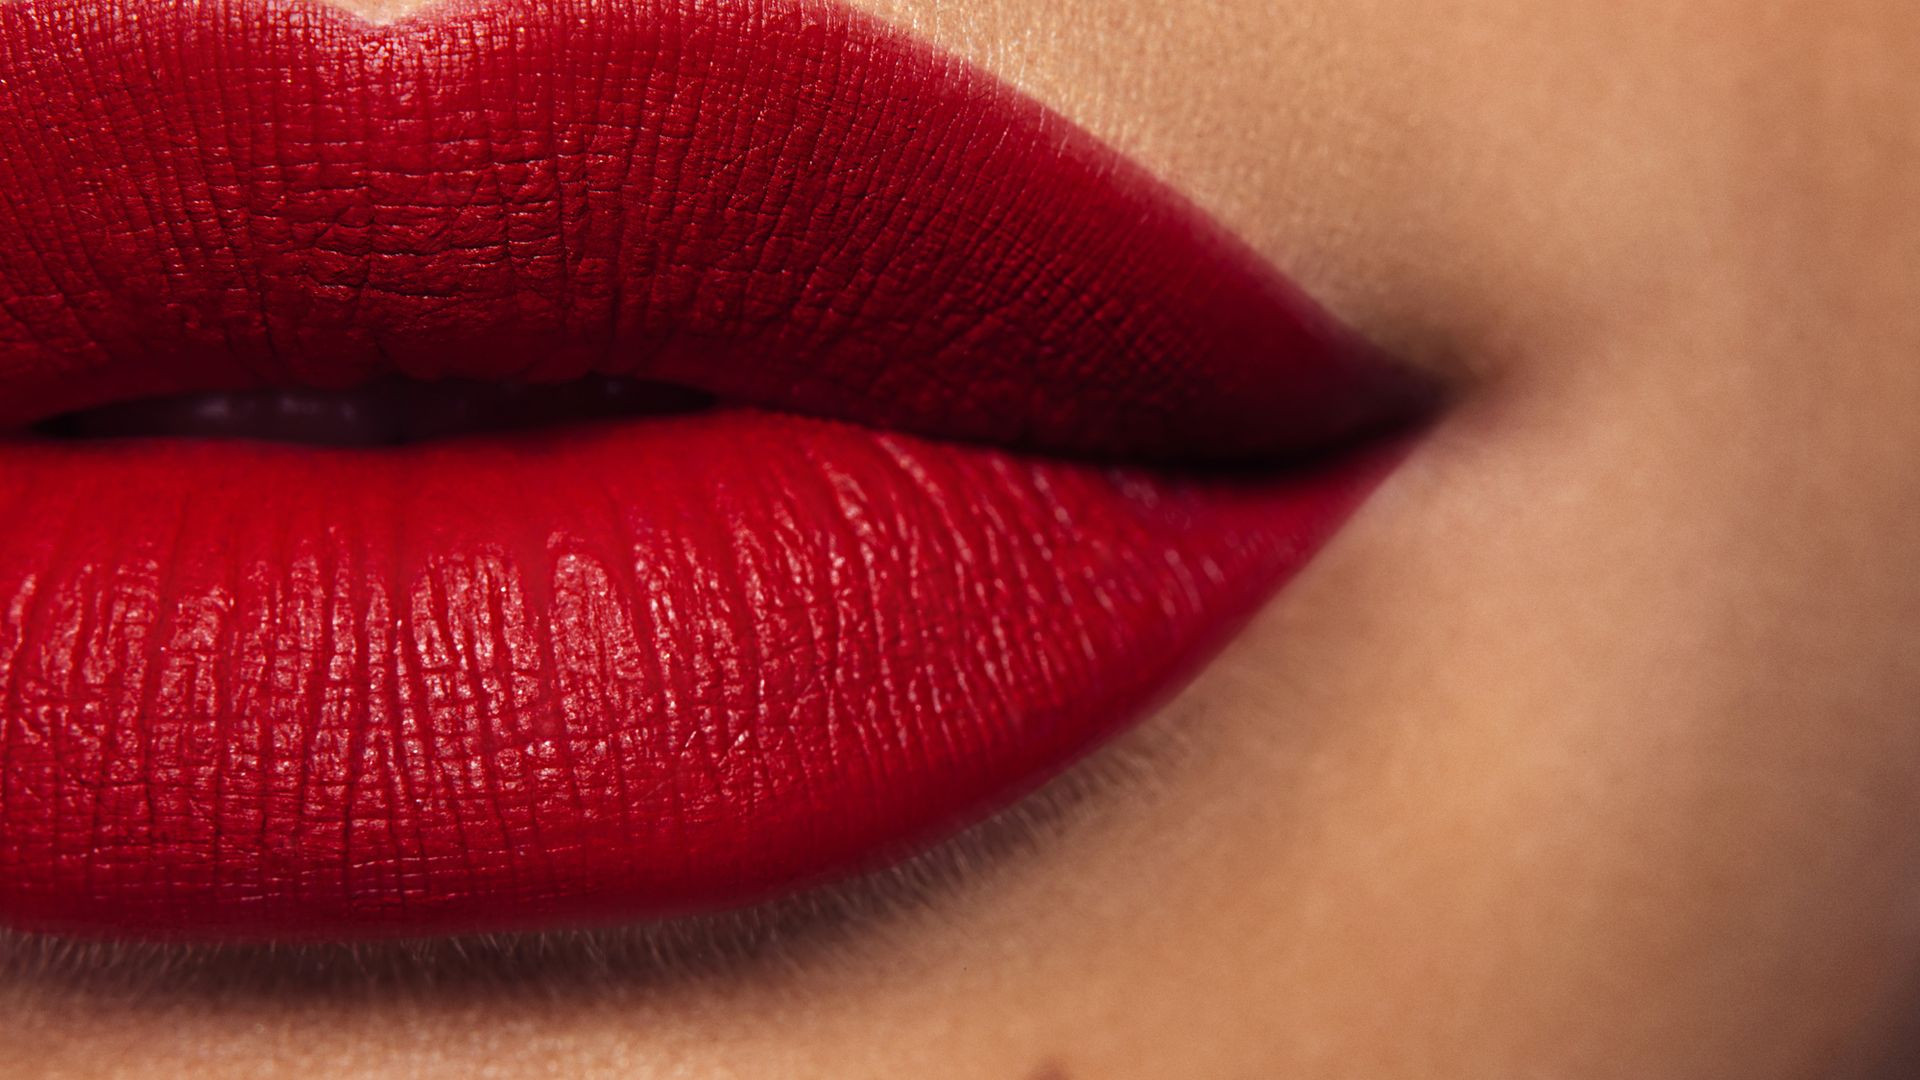 'Why I will never, ever tire of red lipstick'